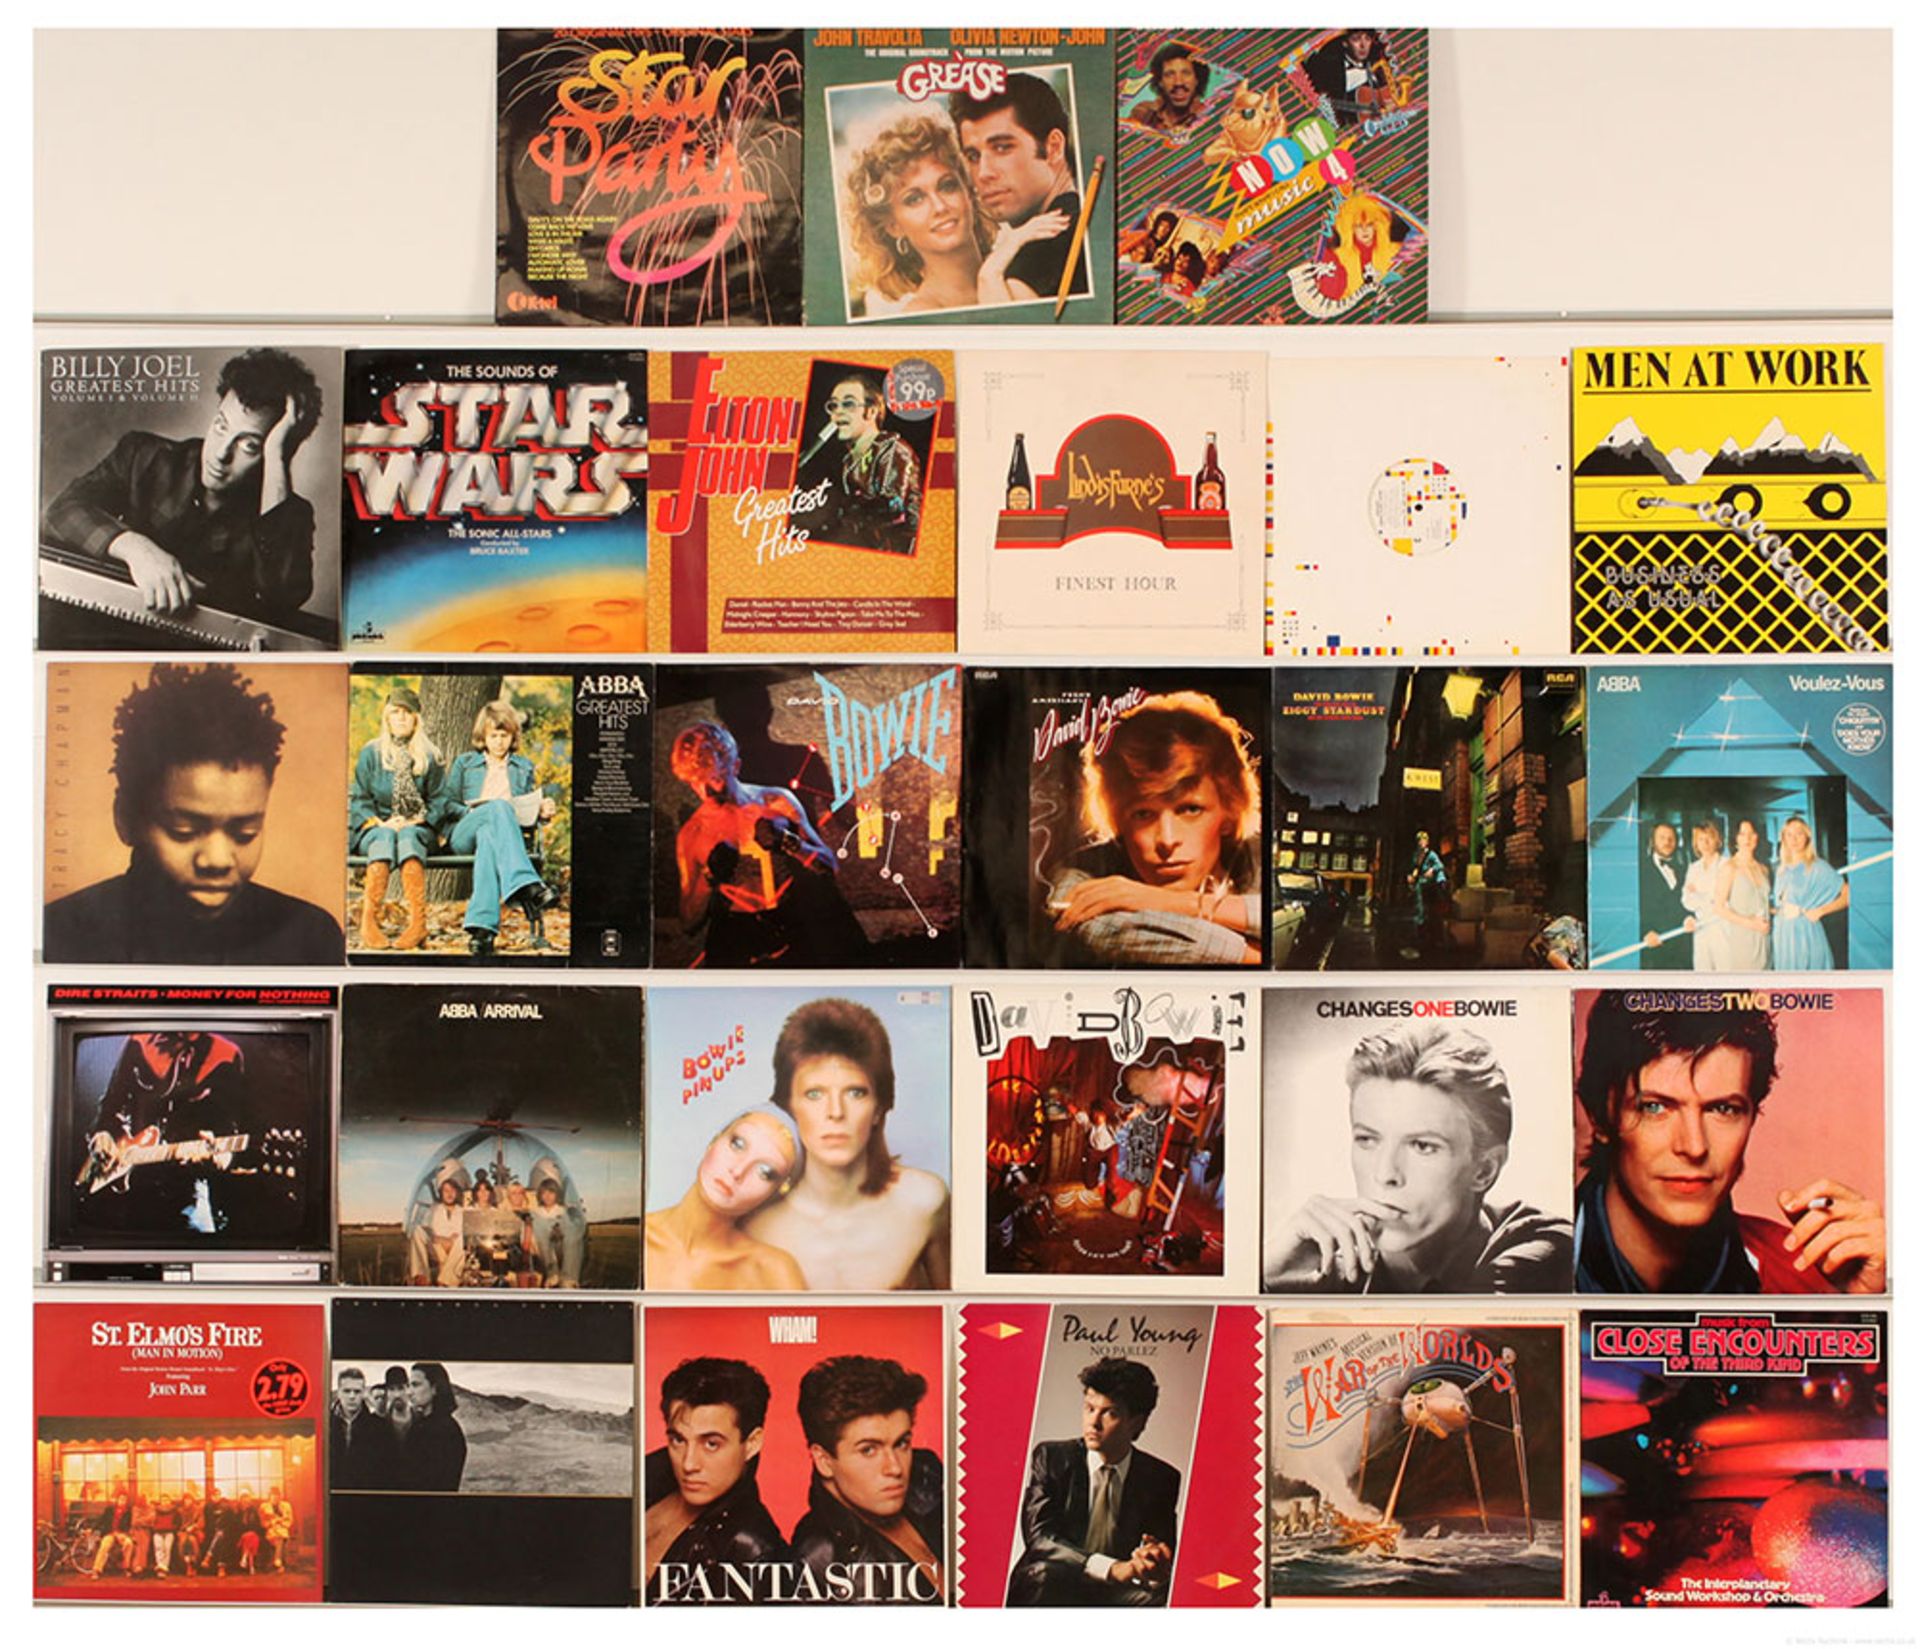 26 70's Rock and Pop 12" LP's as well as a 7"